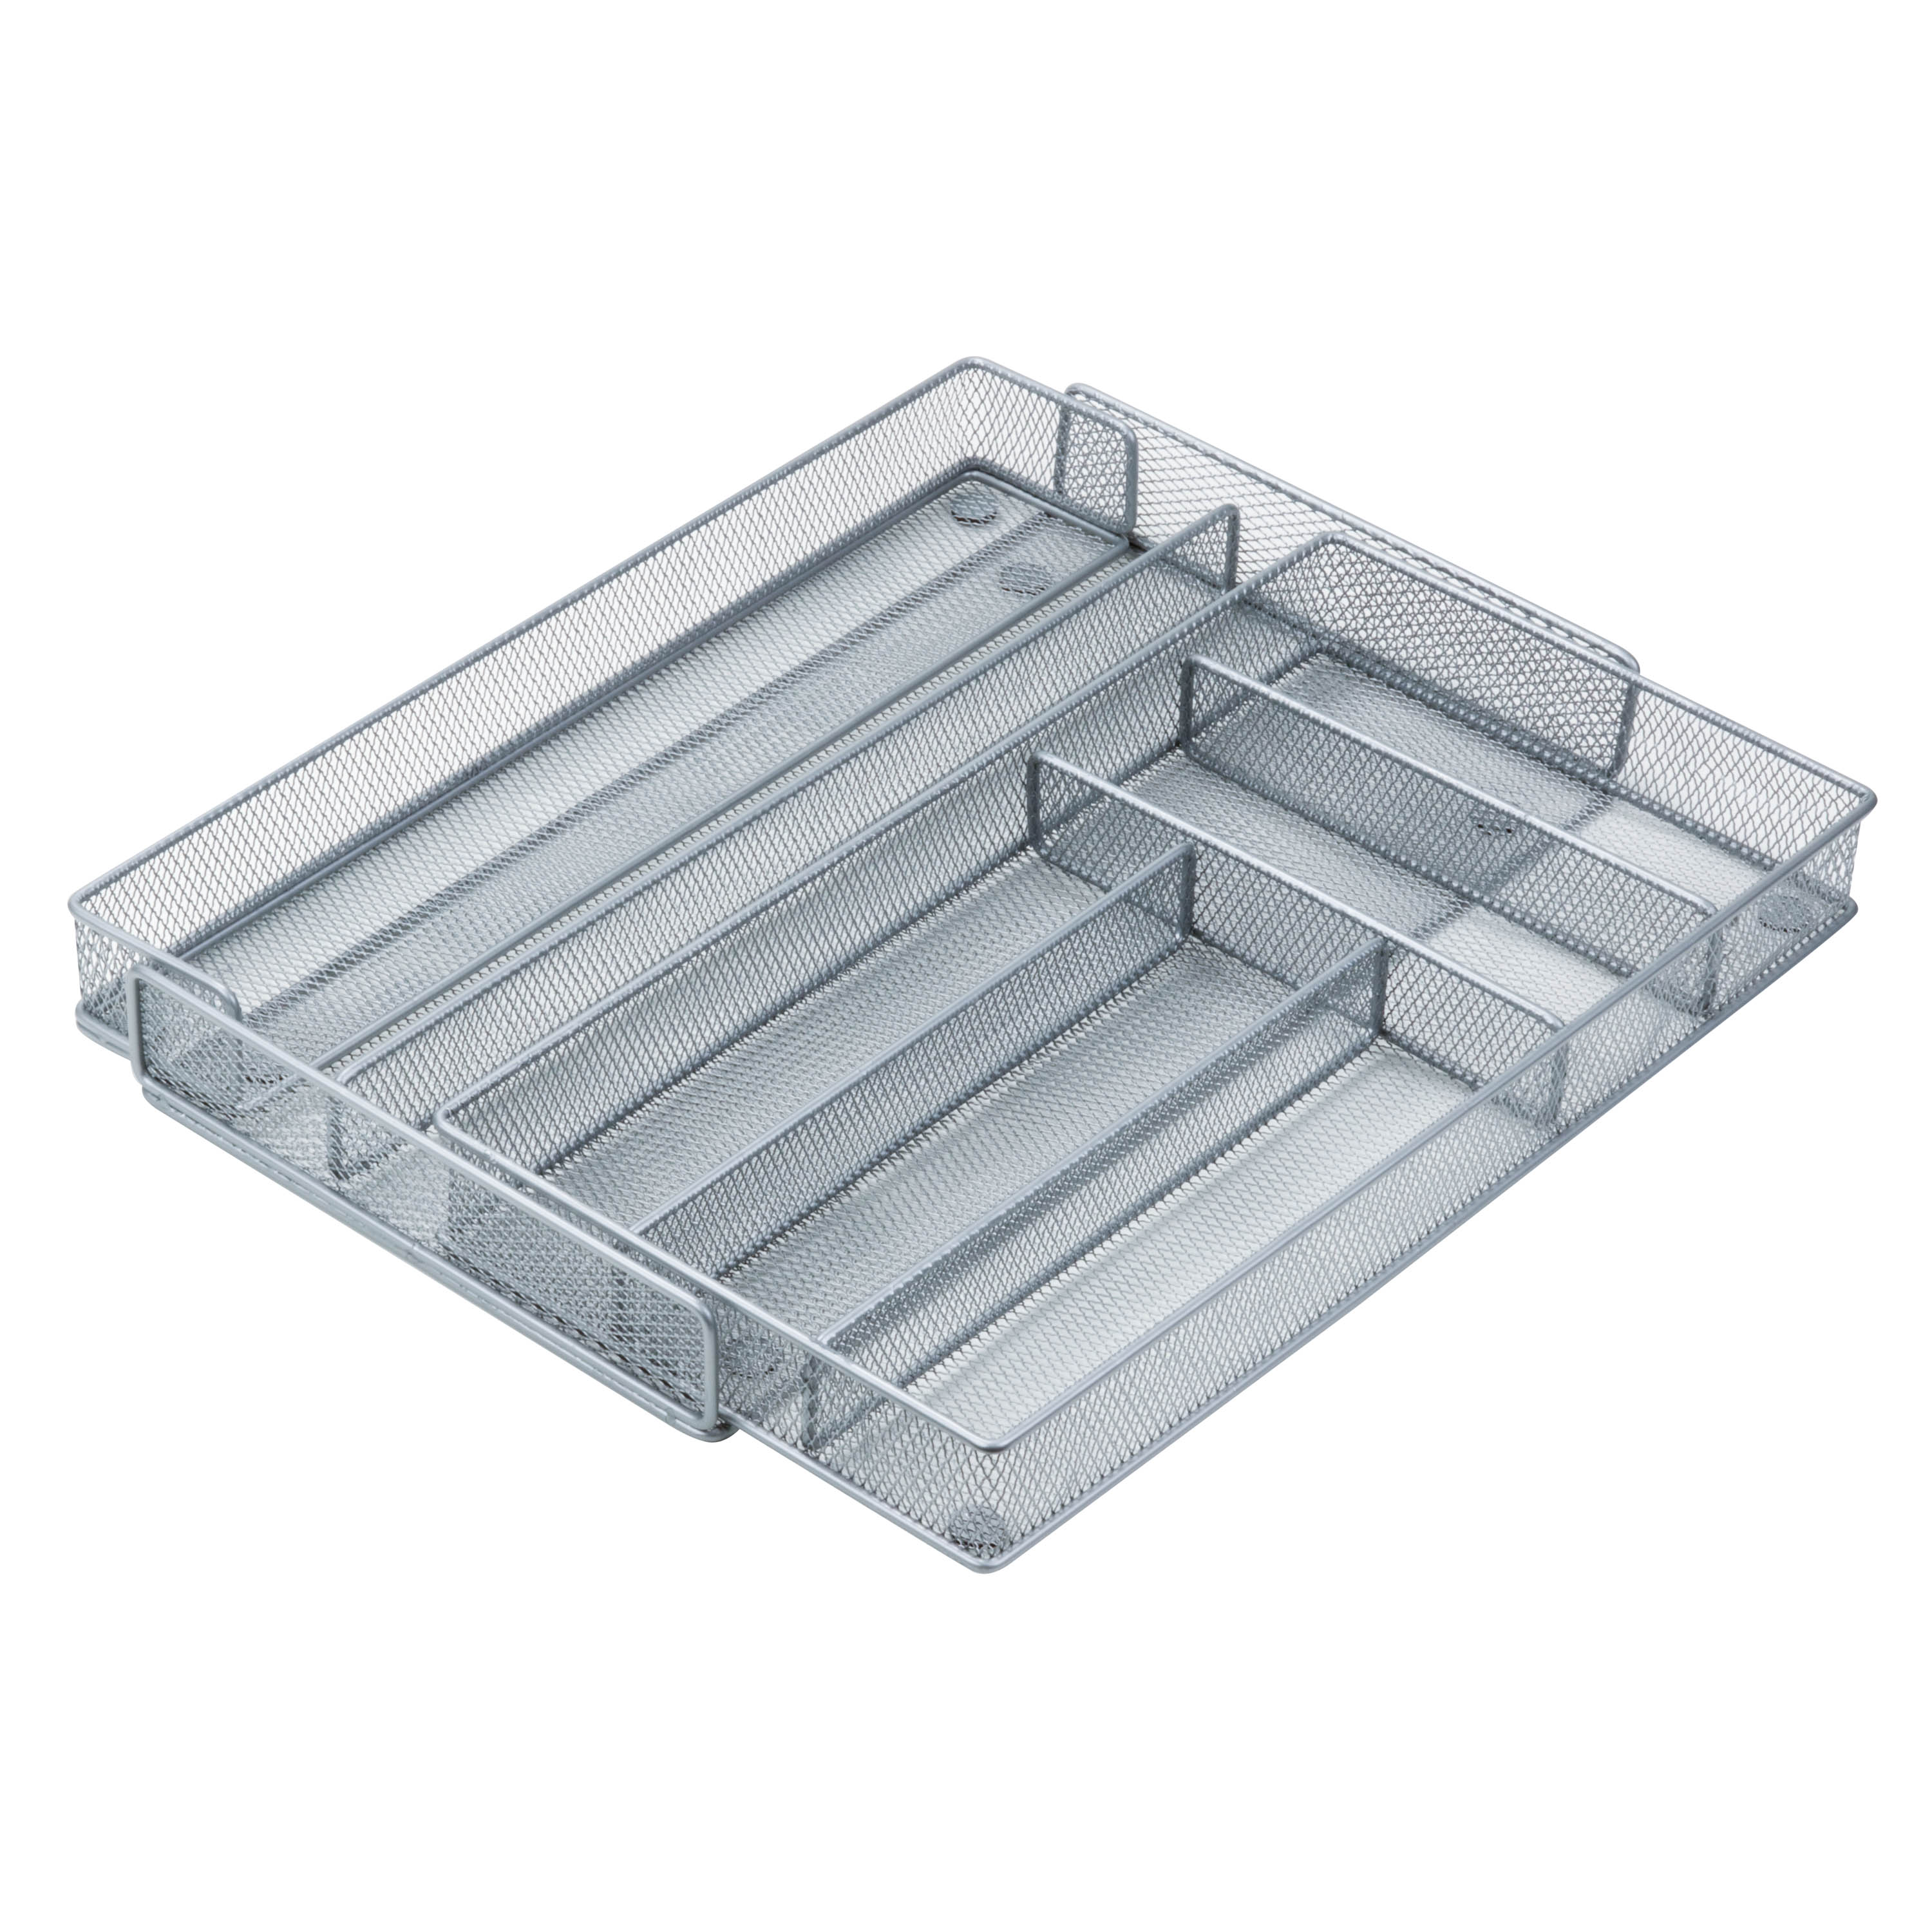 Honey-Can-Do Silver Steel Mesh 16.5" x 11.5" x 2" 7-Compartment Expandable Drawer Organizer - image 2 of 6